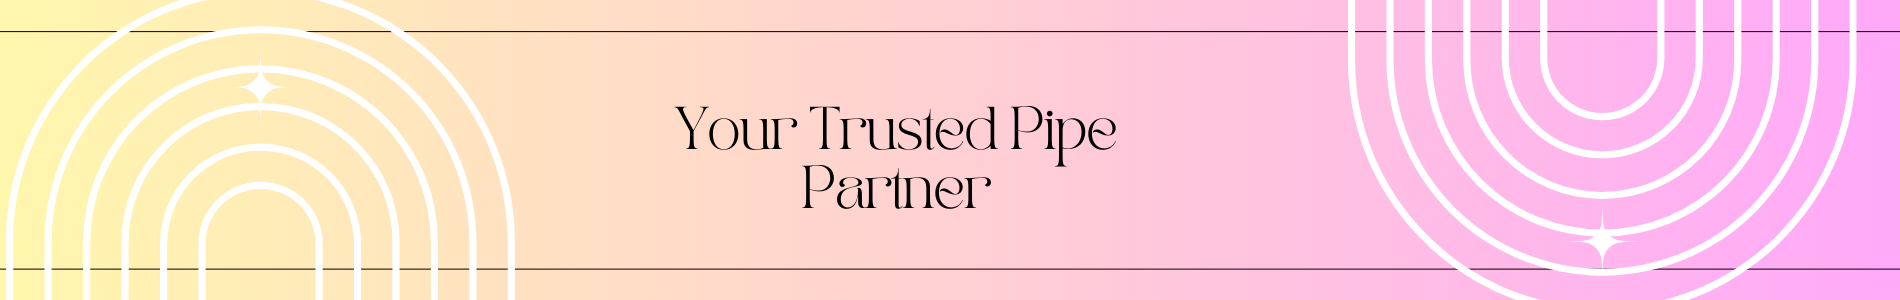 Your trusted pipe partner.png